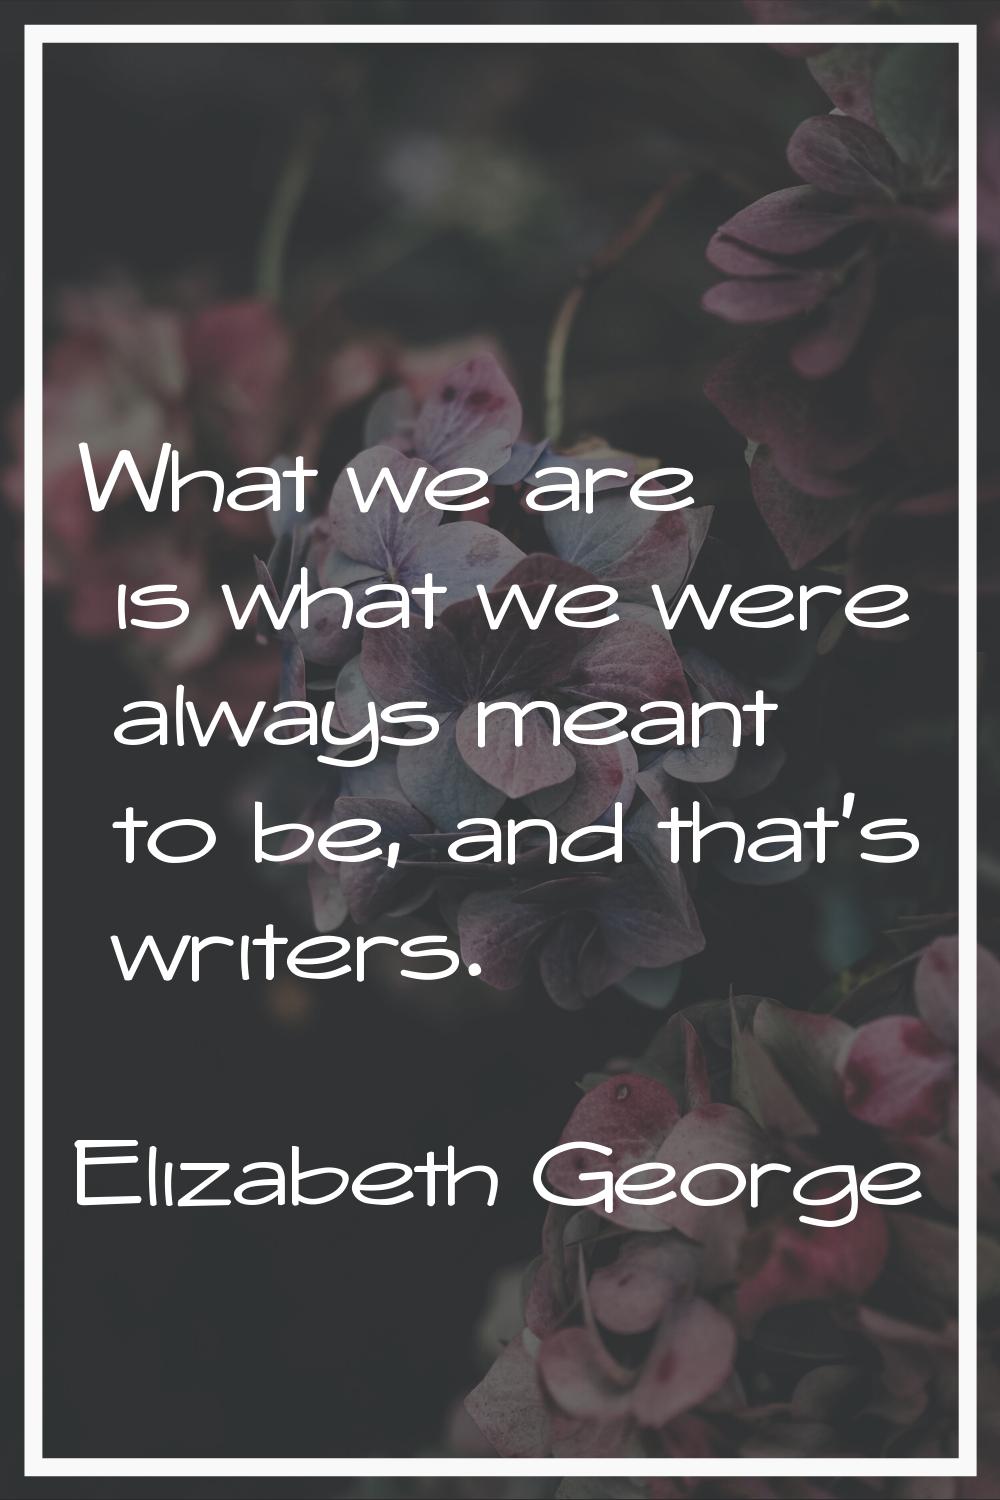 What we are is what we were always meant to be, and that's writers.